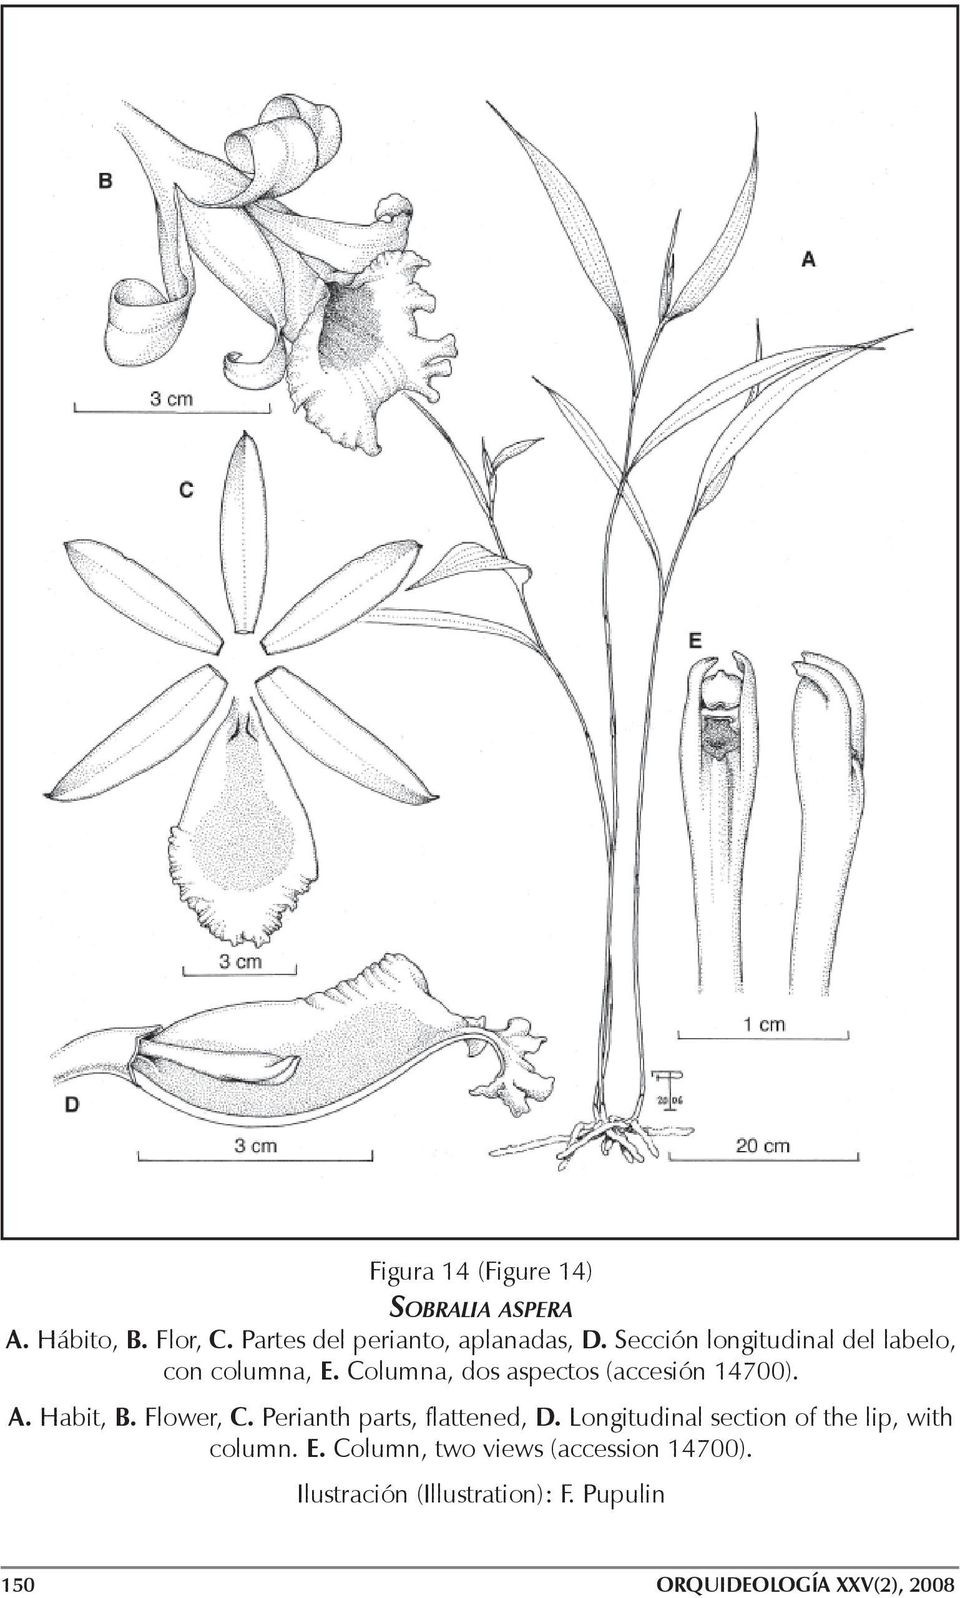 Habit, B. Flower, C. Perianth parts, flattened, D. Longitudinal section of the lip, with column. E.